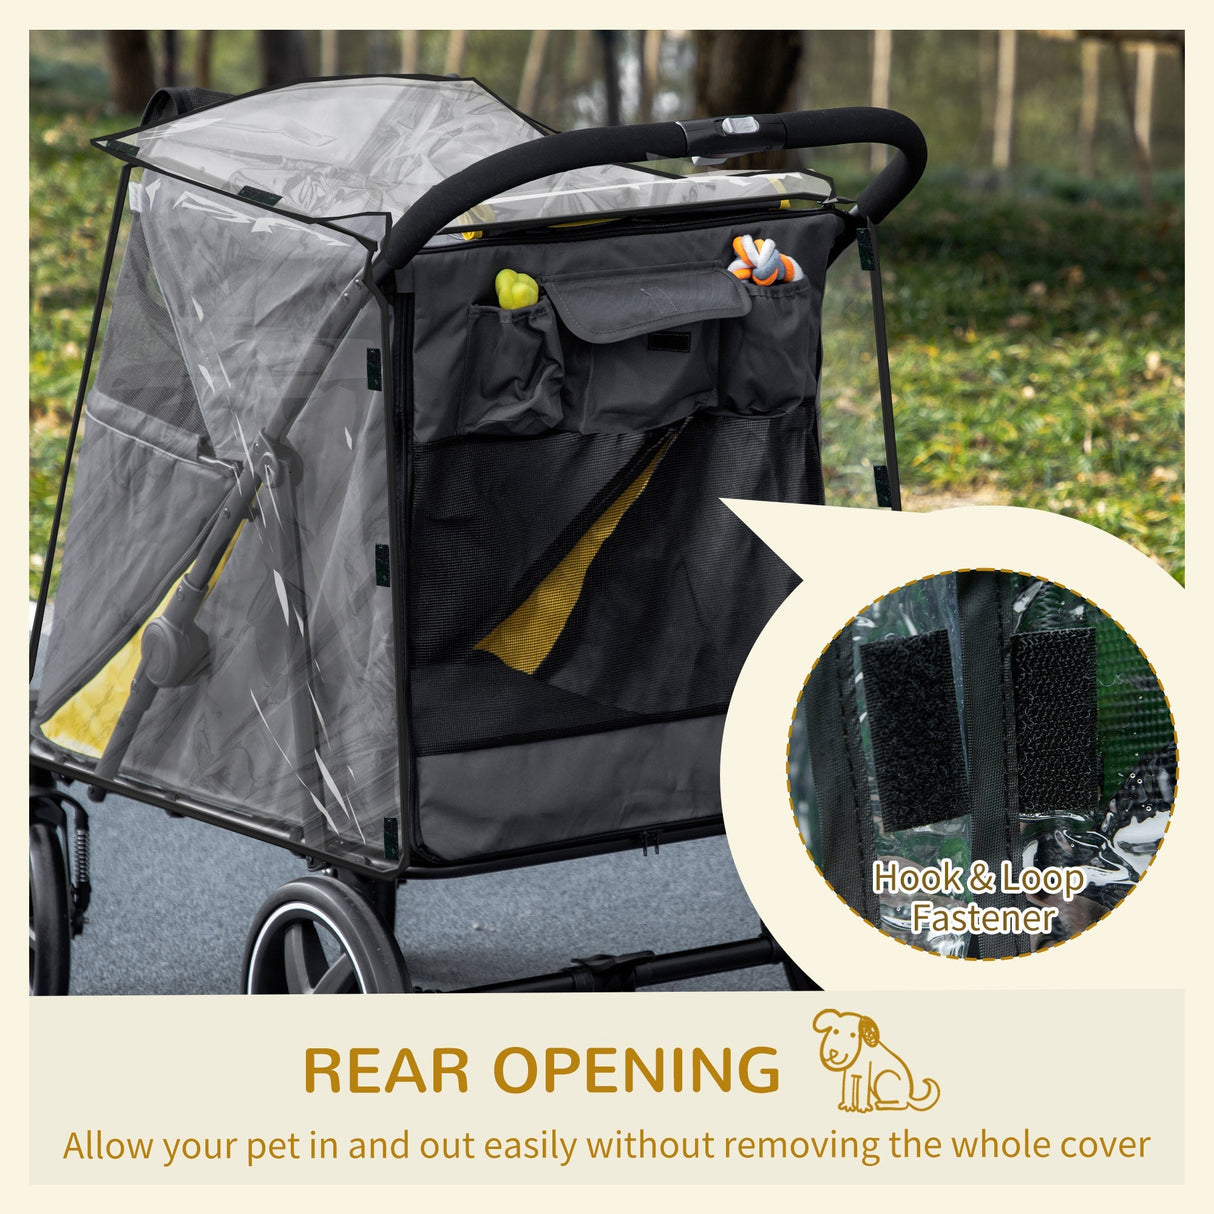 Foldable Pet Stroller with Rain Cover for Dogs - Easy Storage, PawHut, Grey